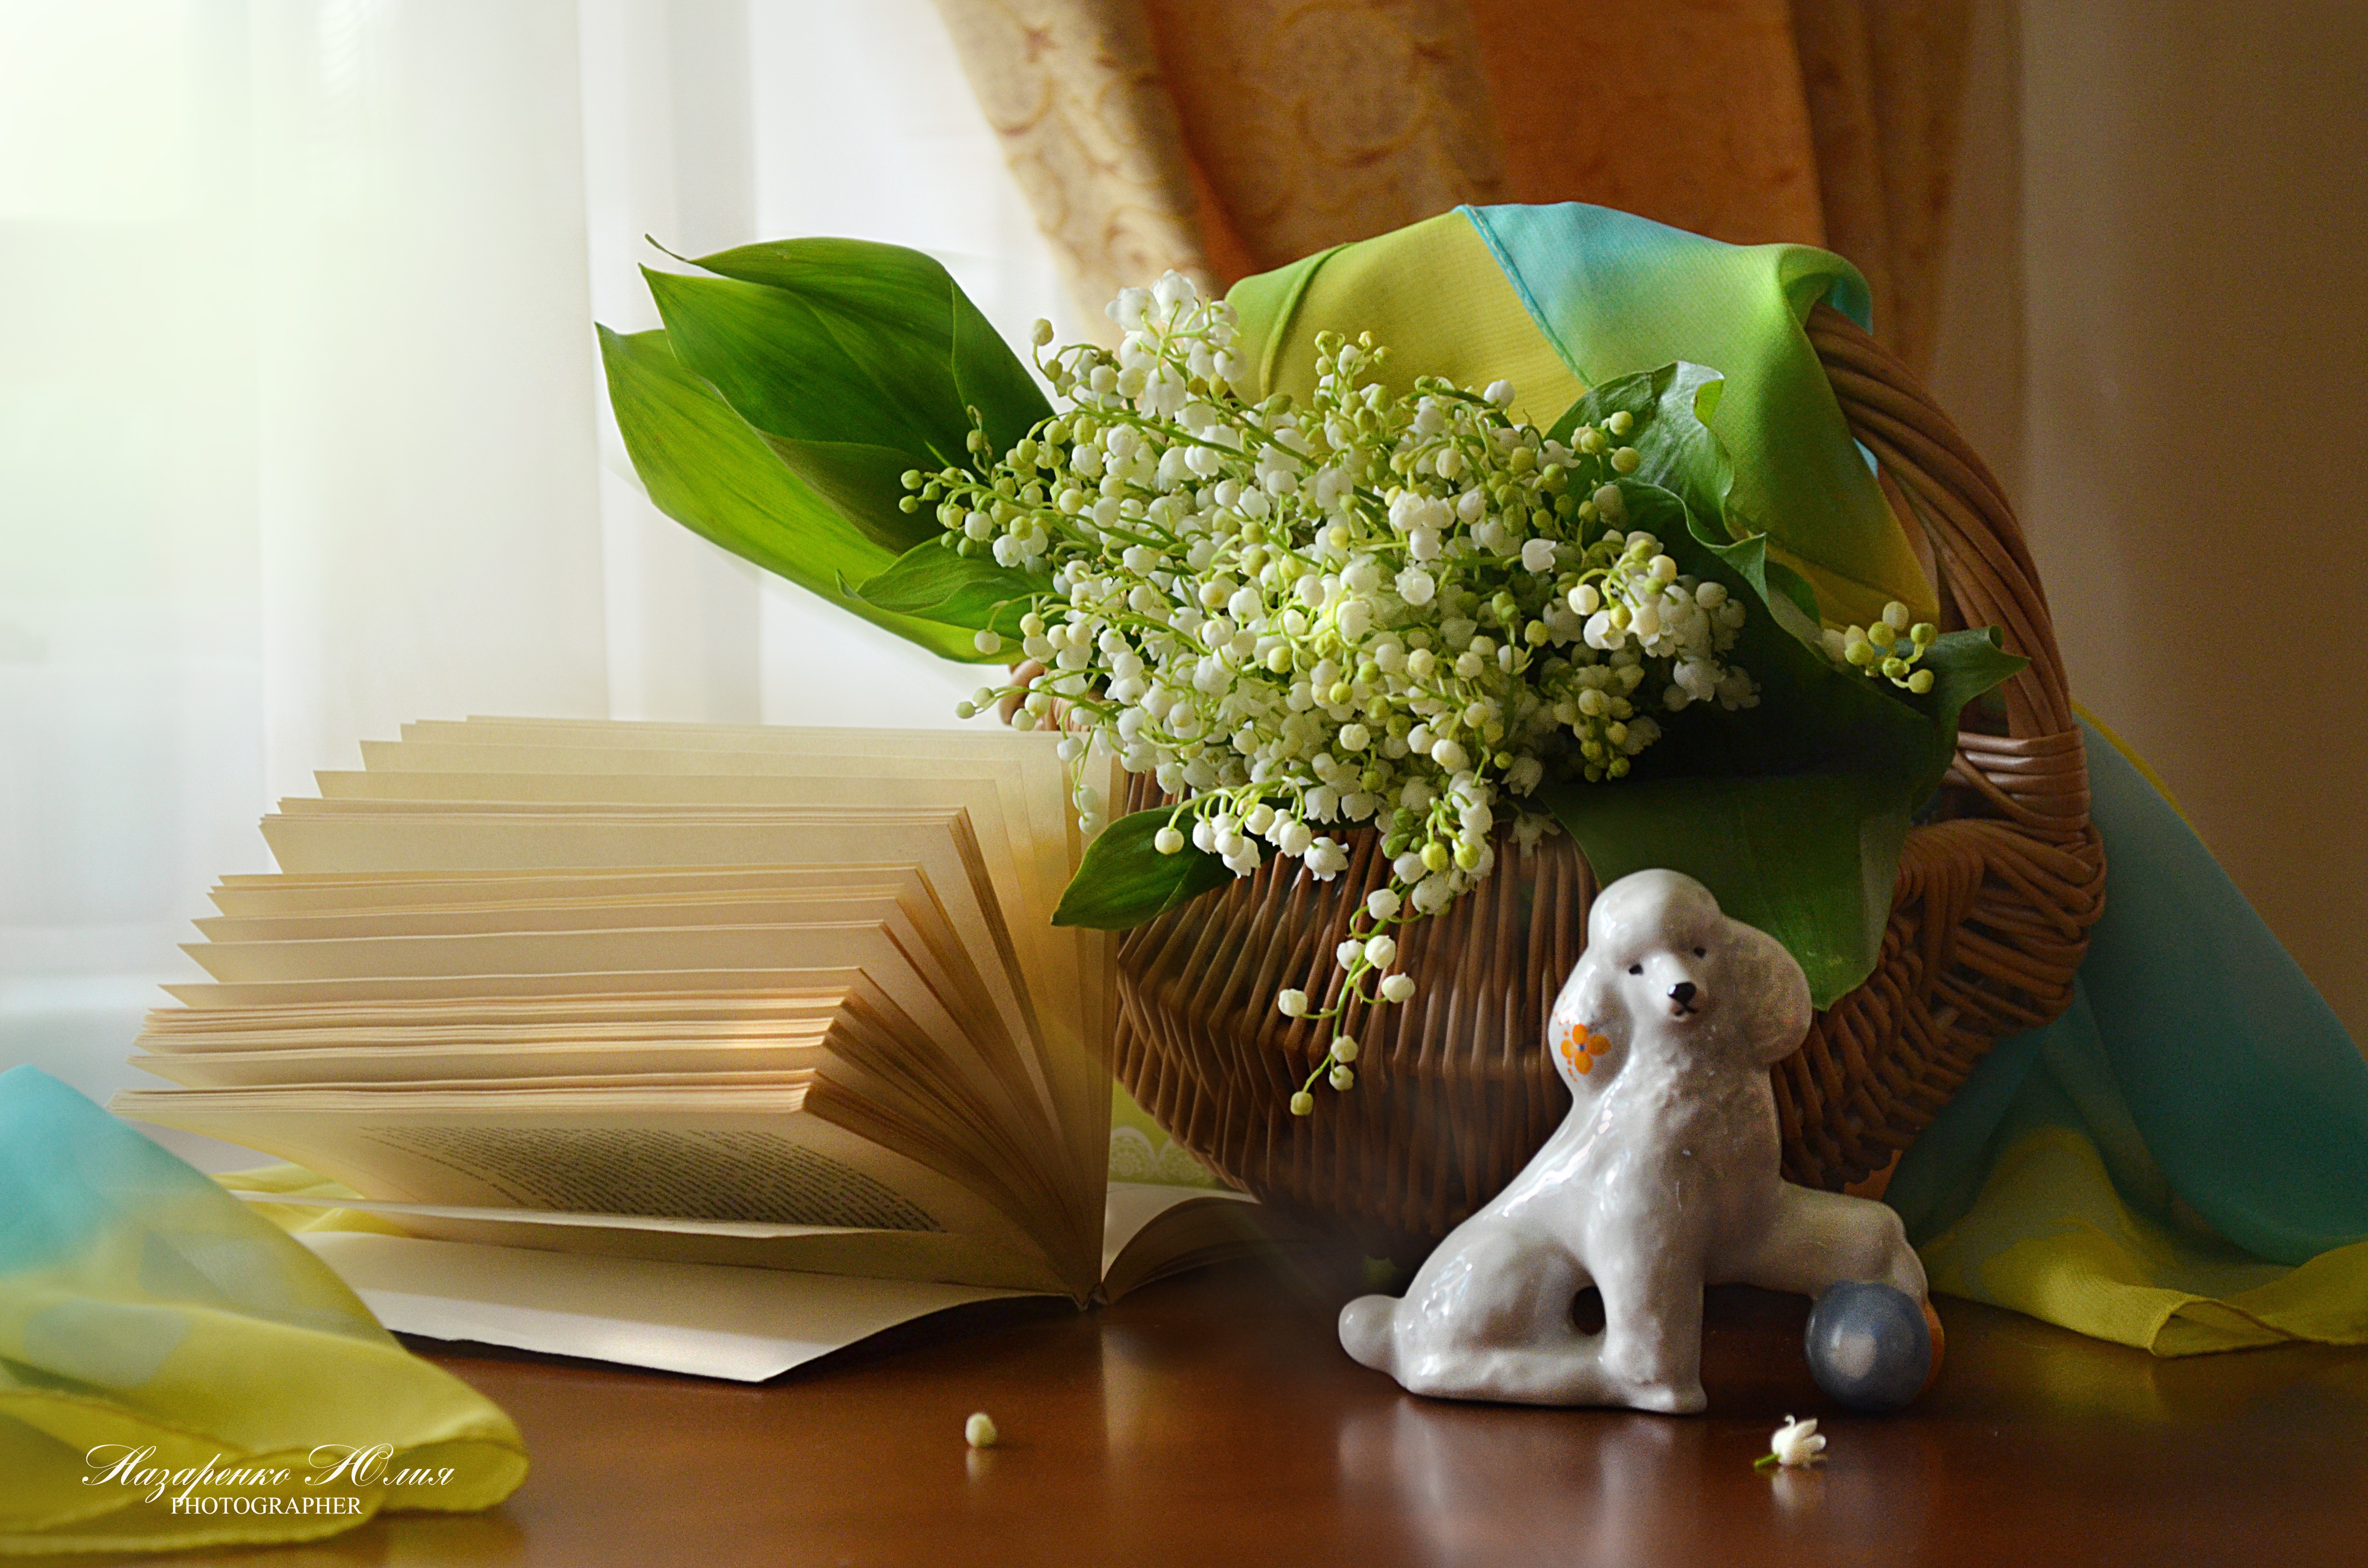 Basket Book Bouquet Dog Figurine Lily Of The Valley Poodle Still Life 4928x3264